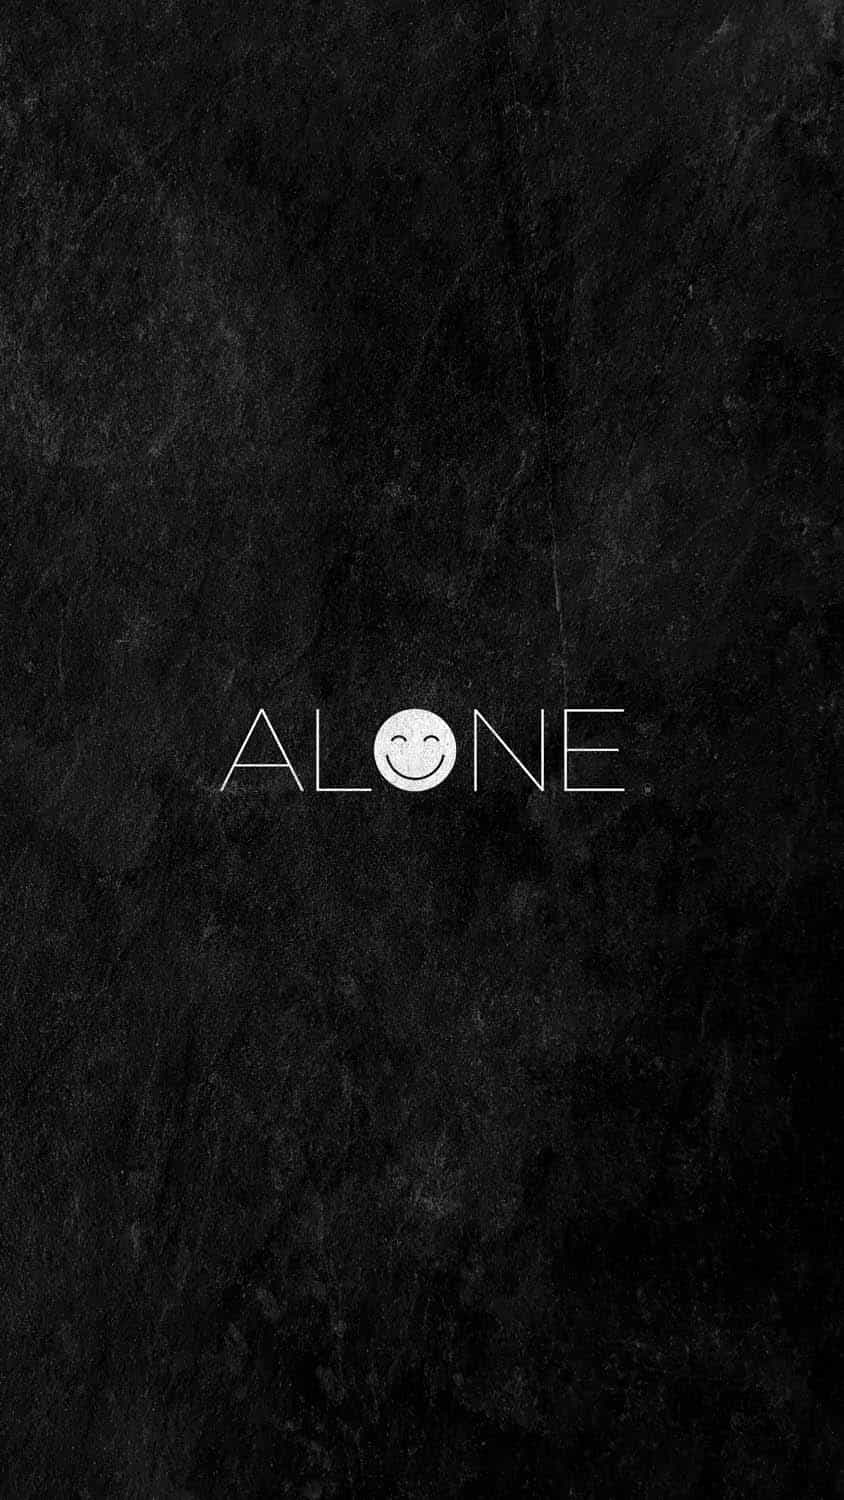 Alone Happy iPhone Wallpaper 4K  iPhone Wallpapers